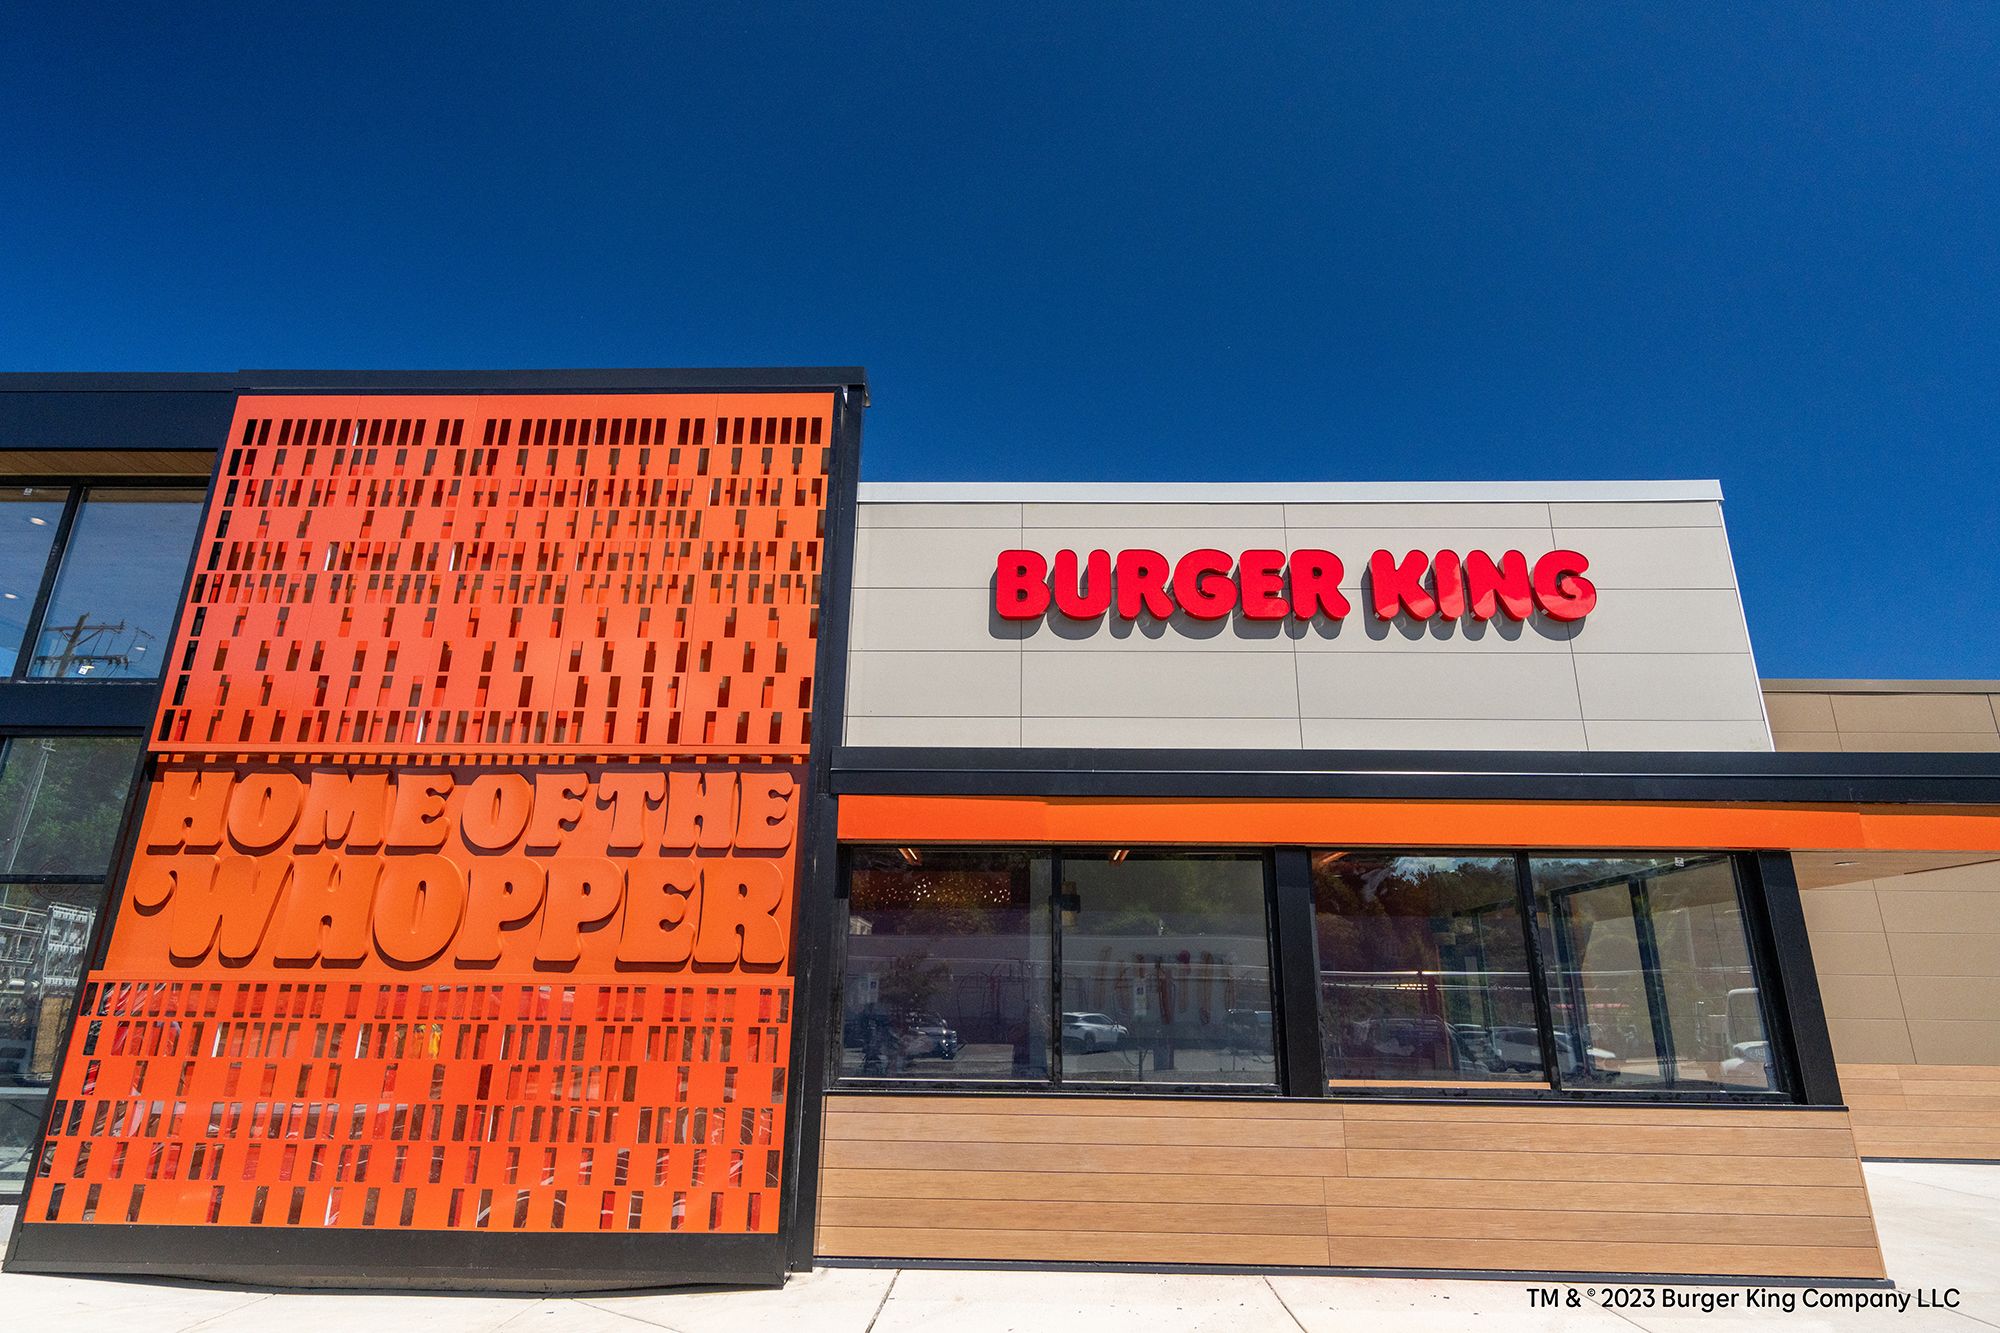 Burger King's new store design, Sizzle, features lots of Whopper branding.
Photo credit:	Burger Kin...